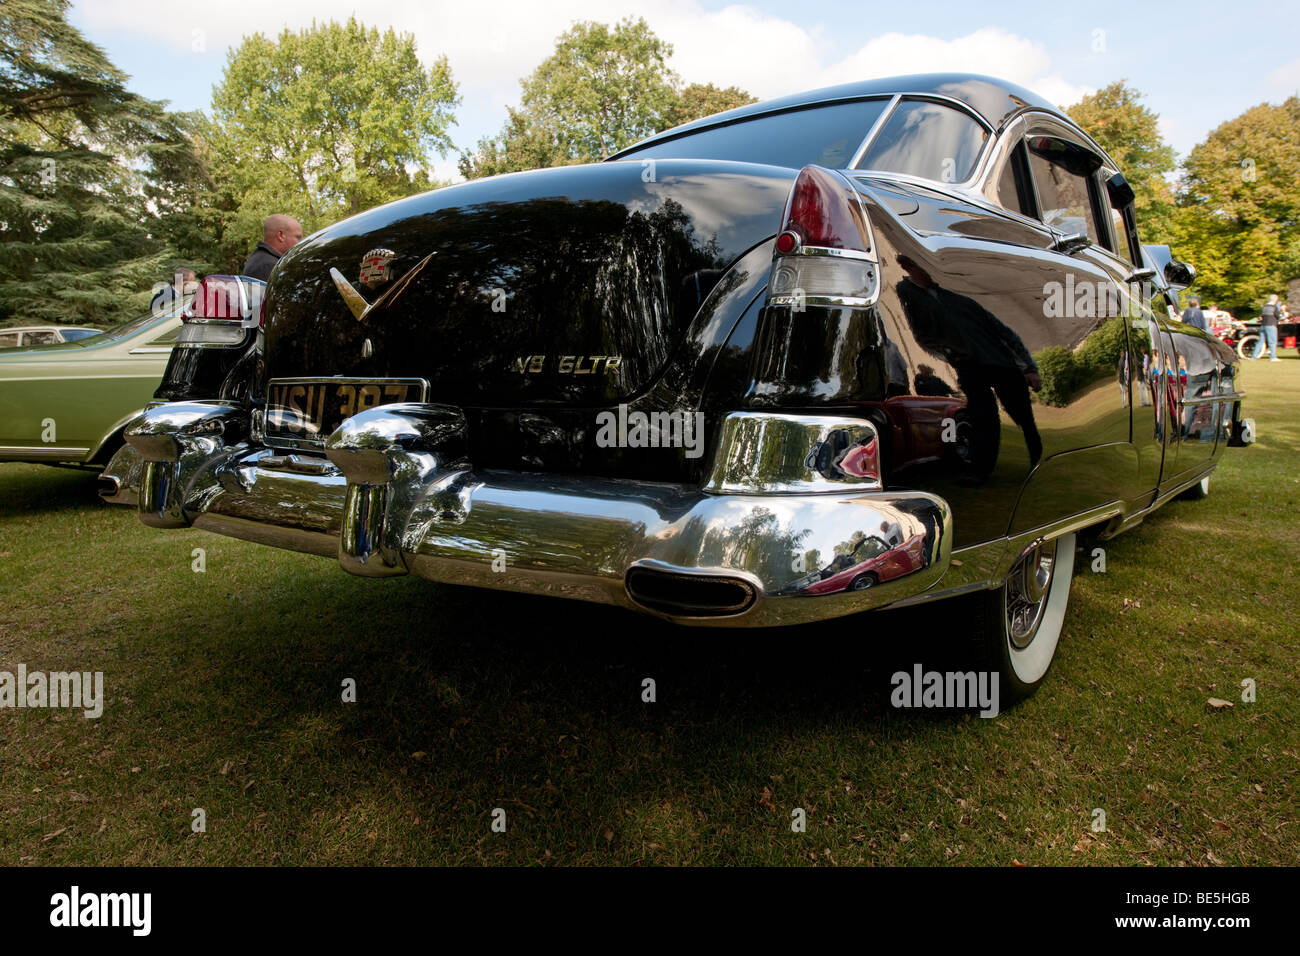 1952 black V8 6 liter Cadillac being shown at classic car show at Hedingham Castle, Essex, UK. Stock Photo